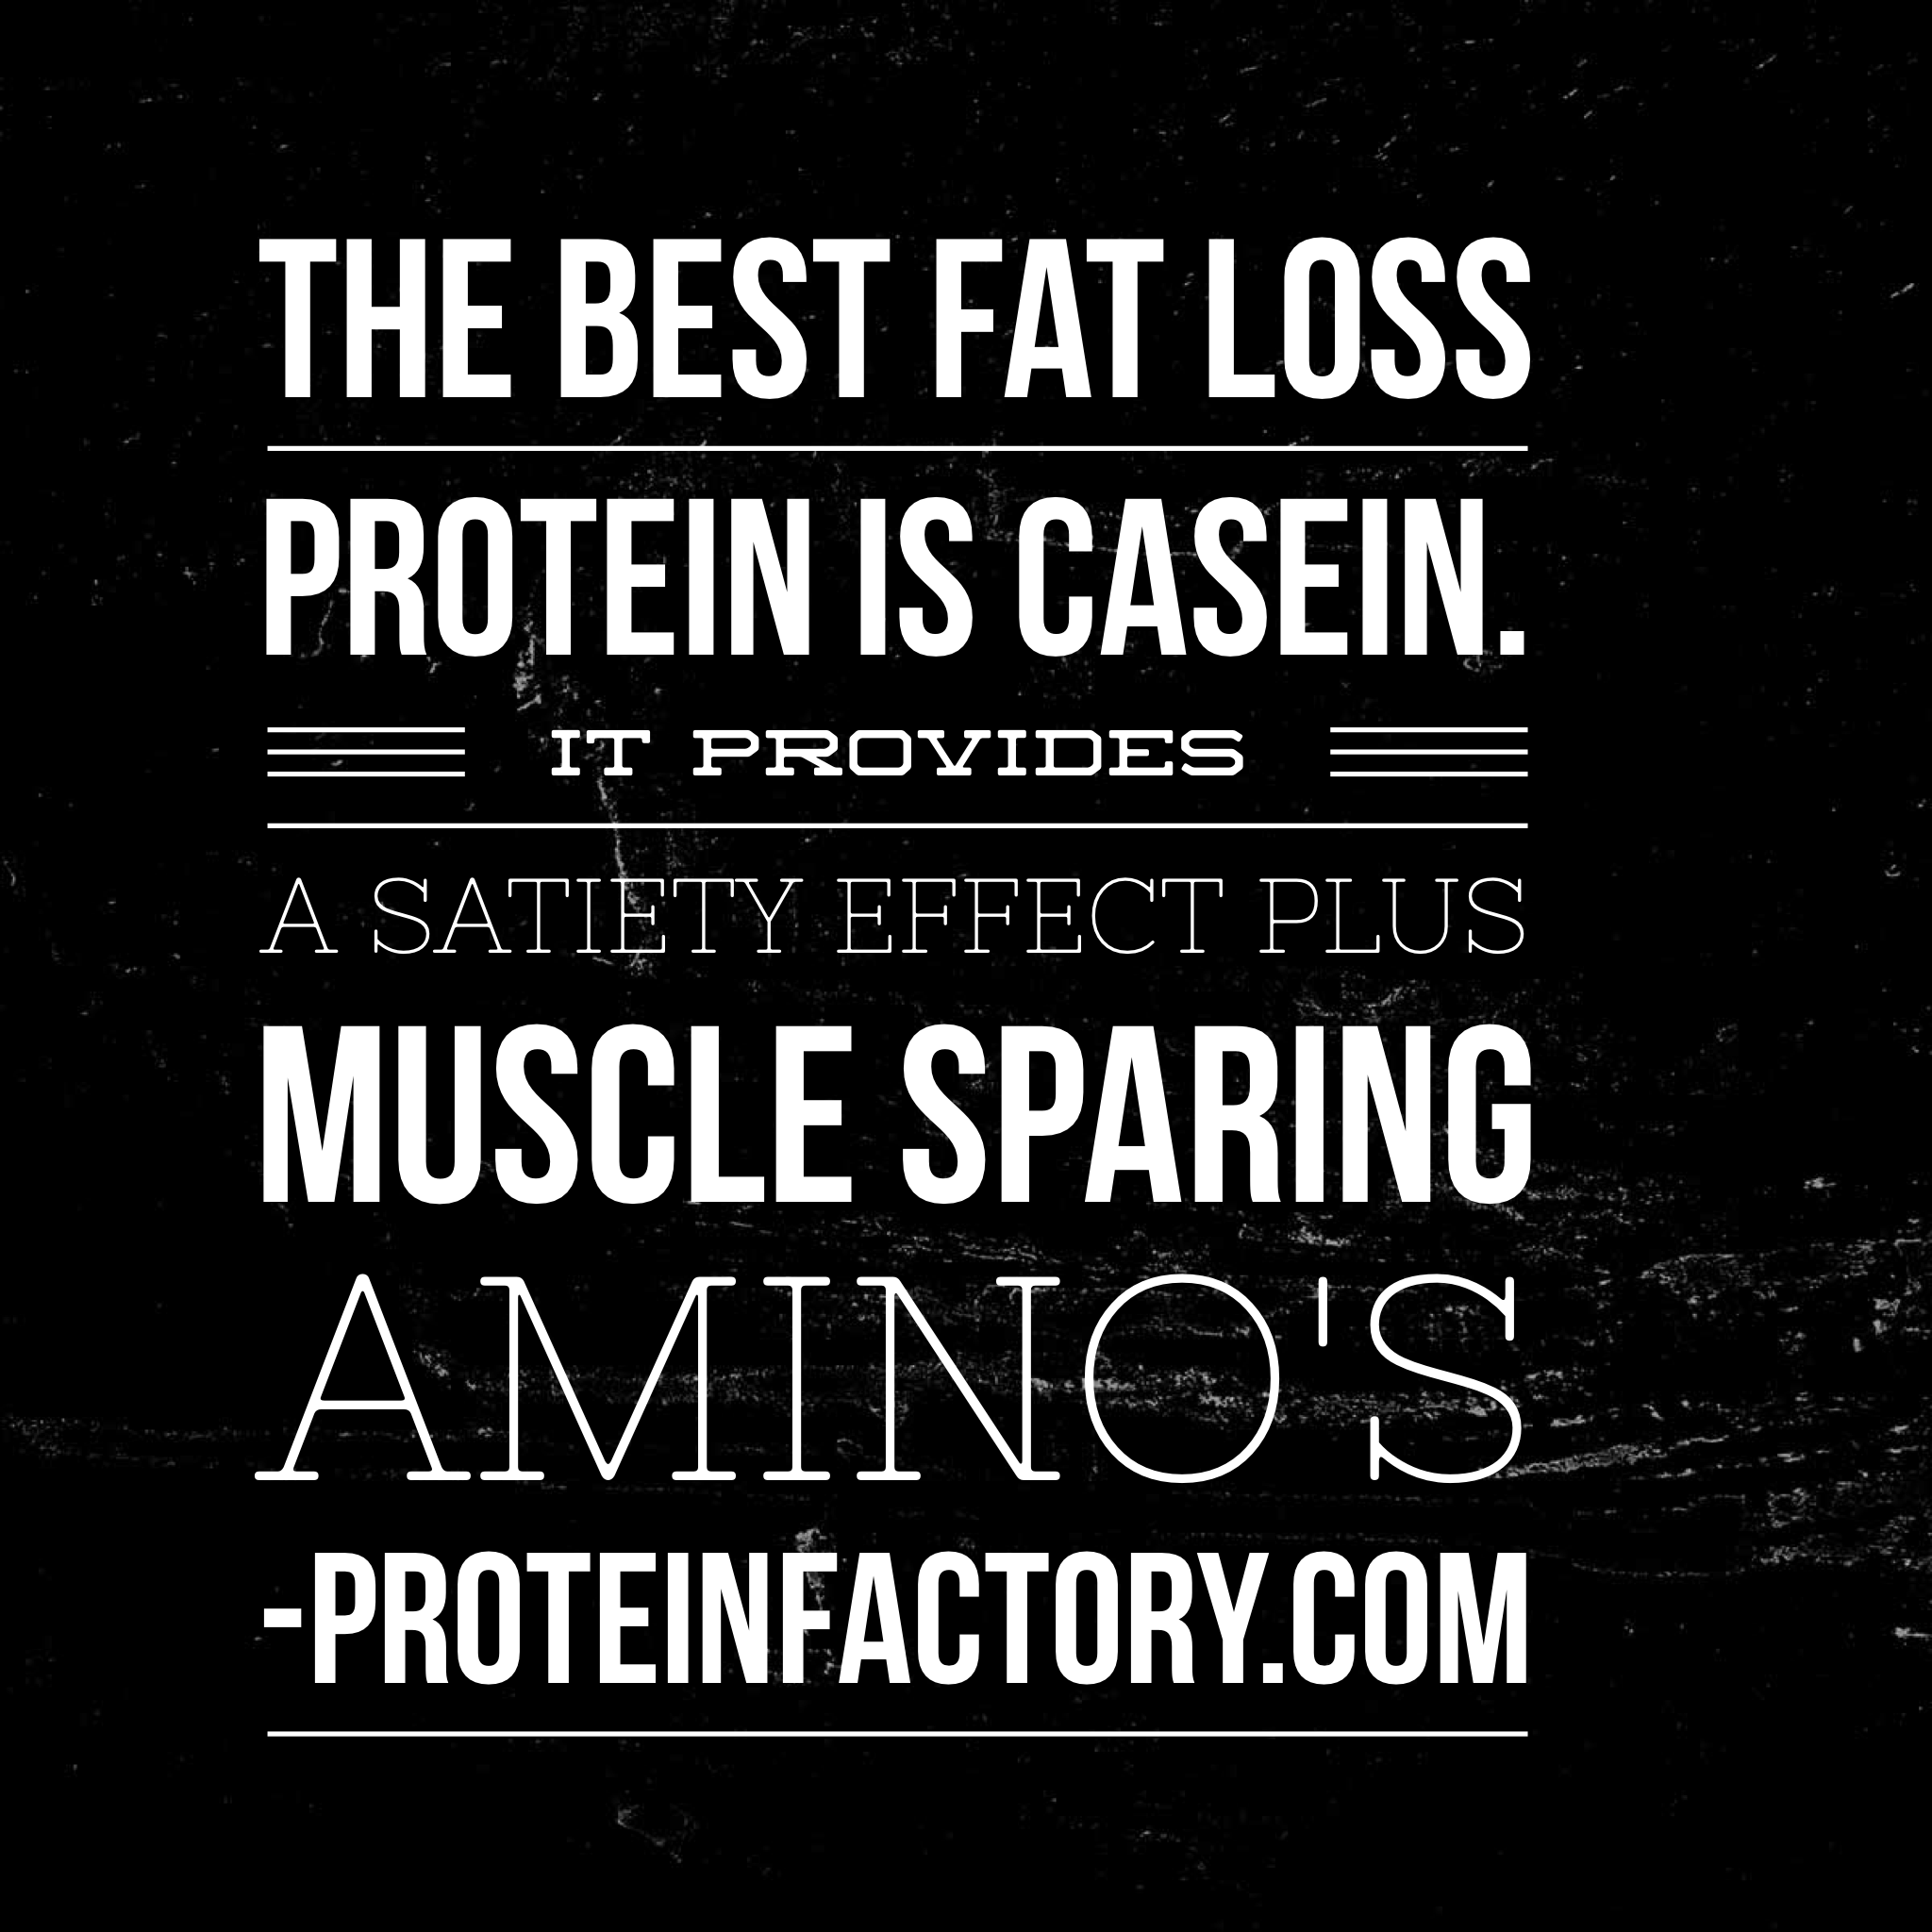 And The Winner For Best Fat Loss Protein Is….